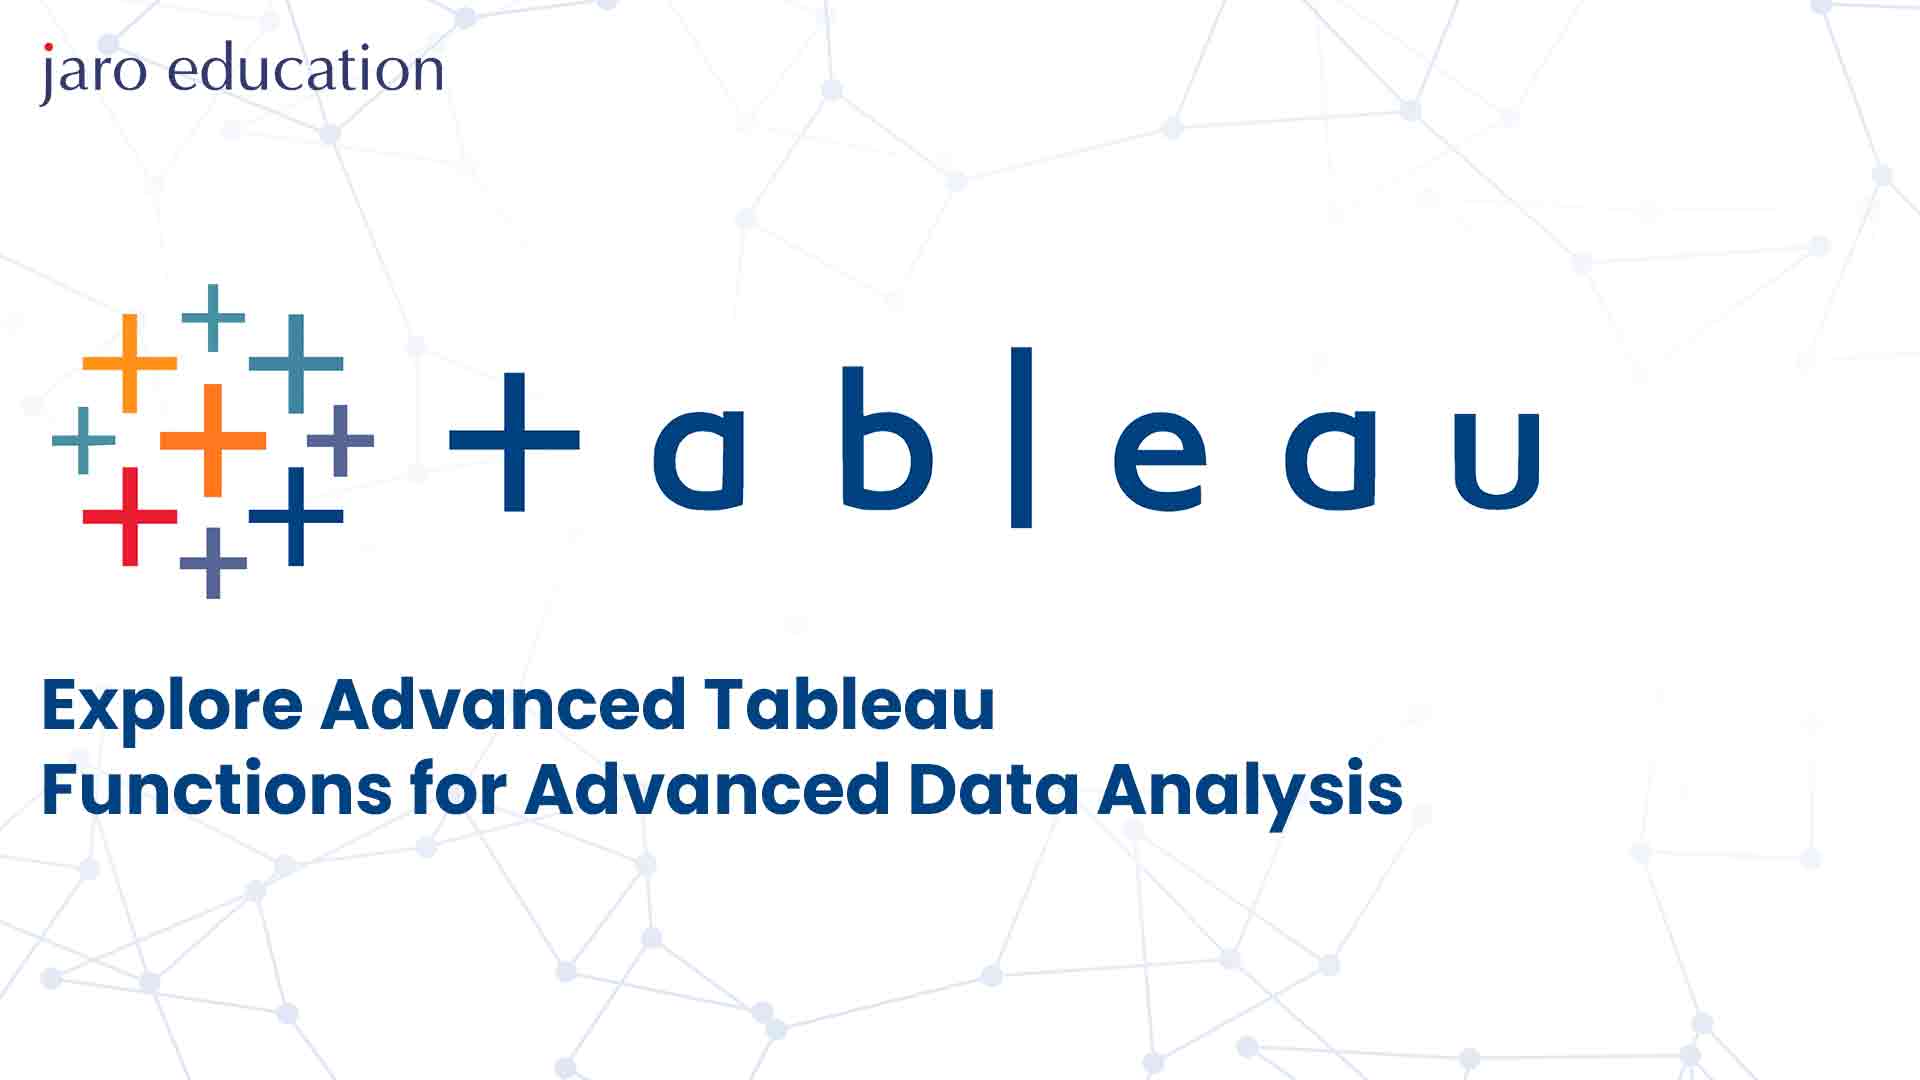 Explore Advanced Tableau Functions for Advanced Data Analysis